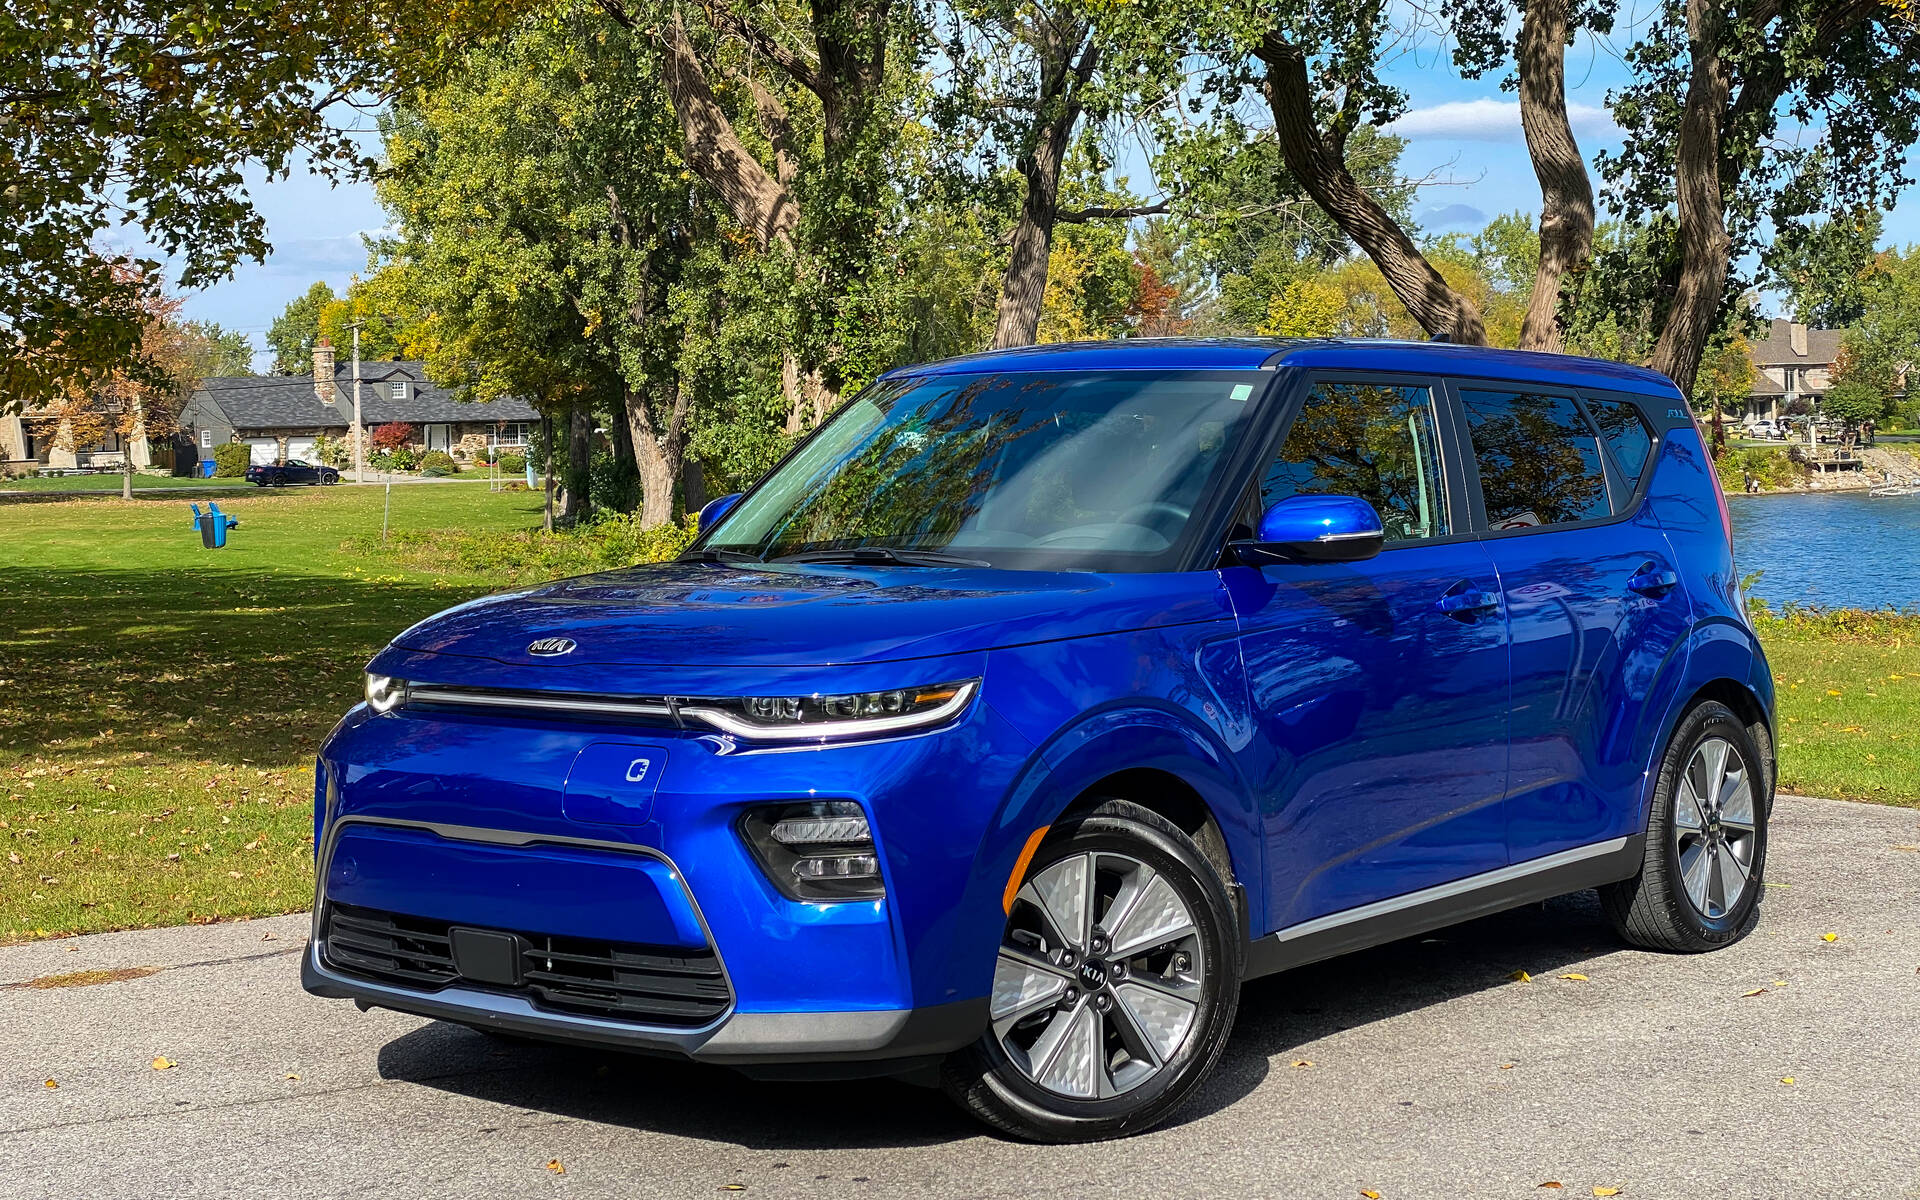 2021 Kia Soul - News, reviews, picture galleries and videos - The Car Guide